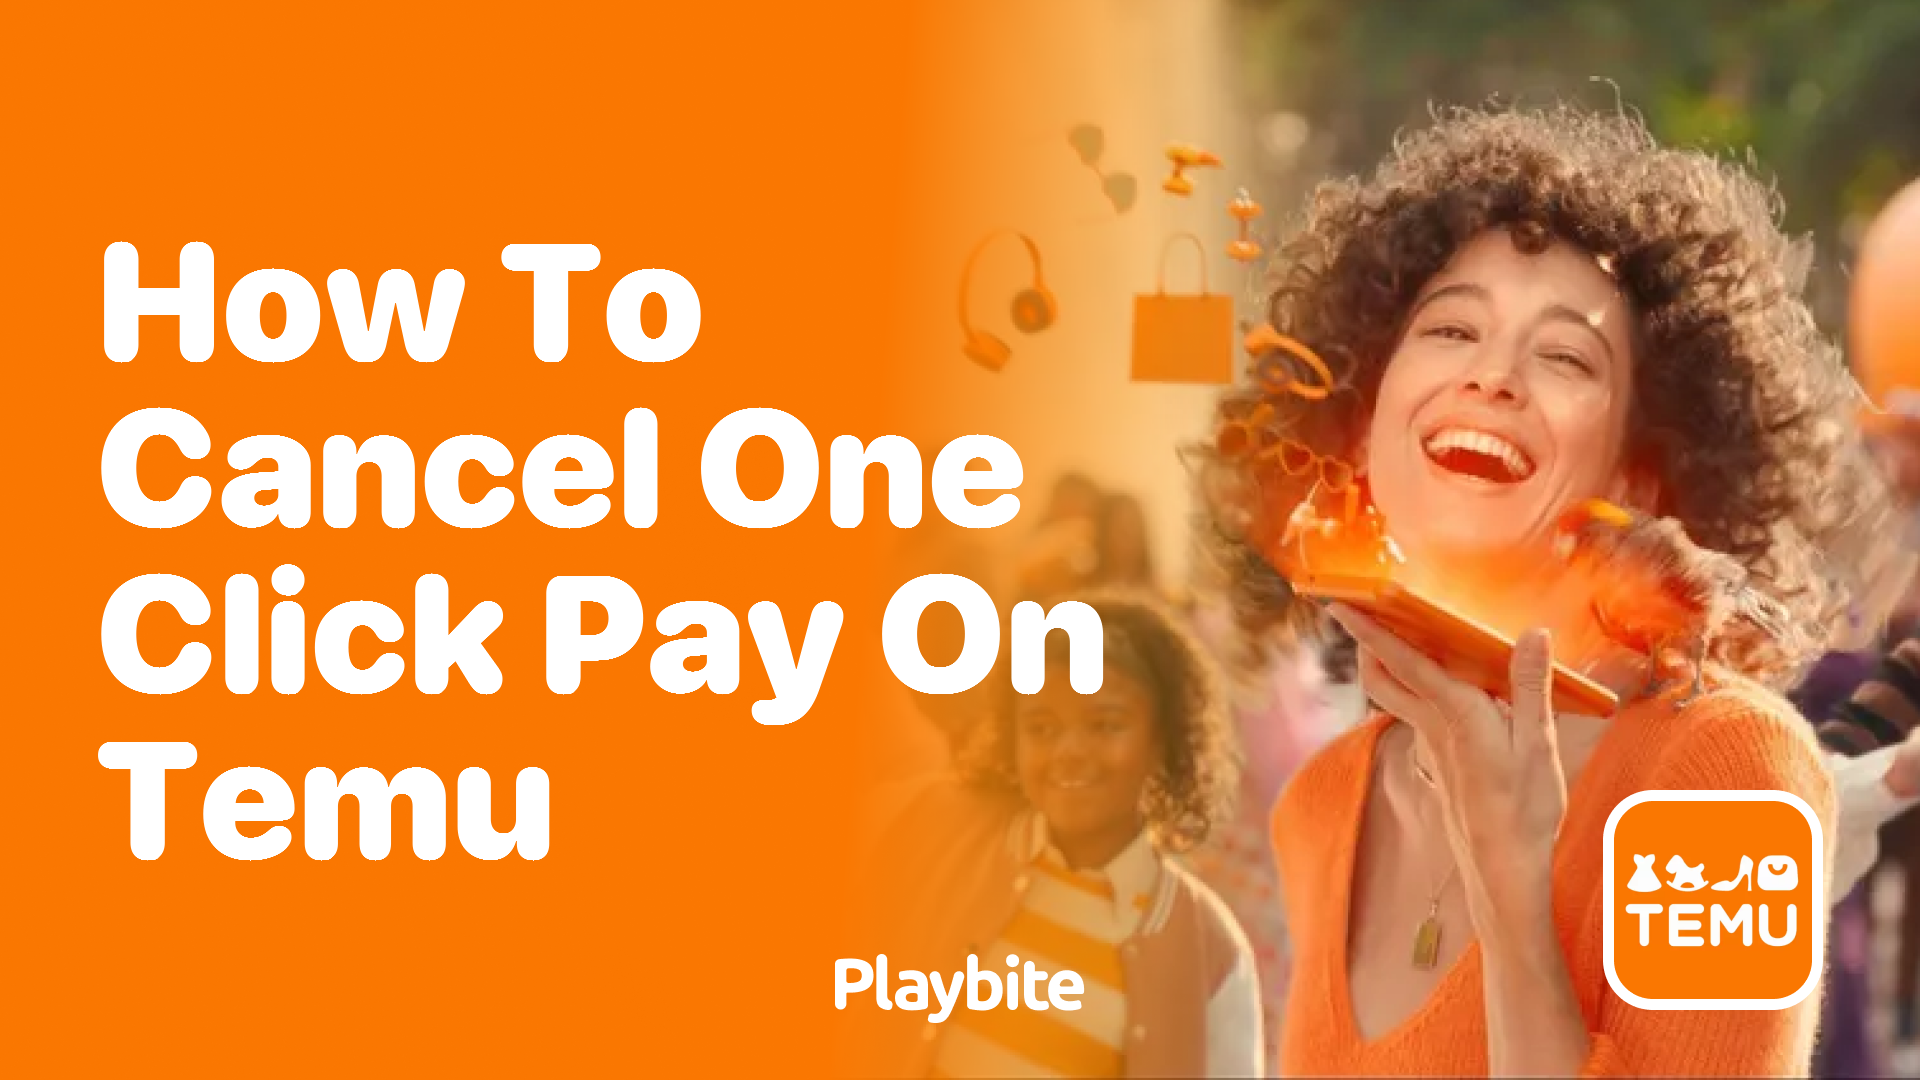 How to Cancel One-Click Pay on Temu